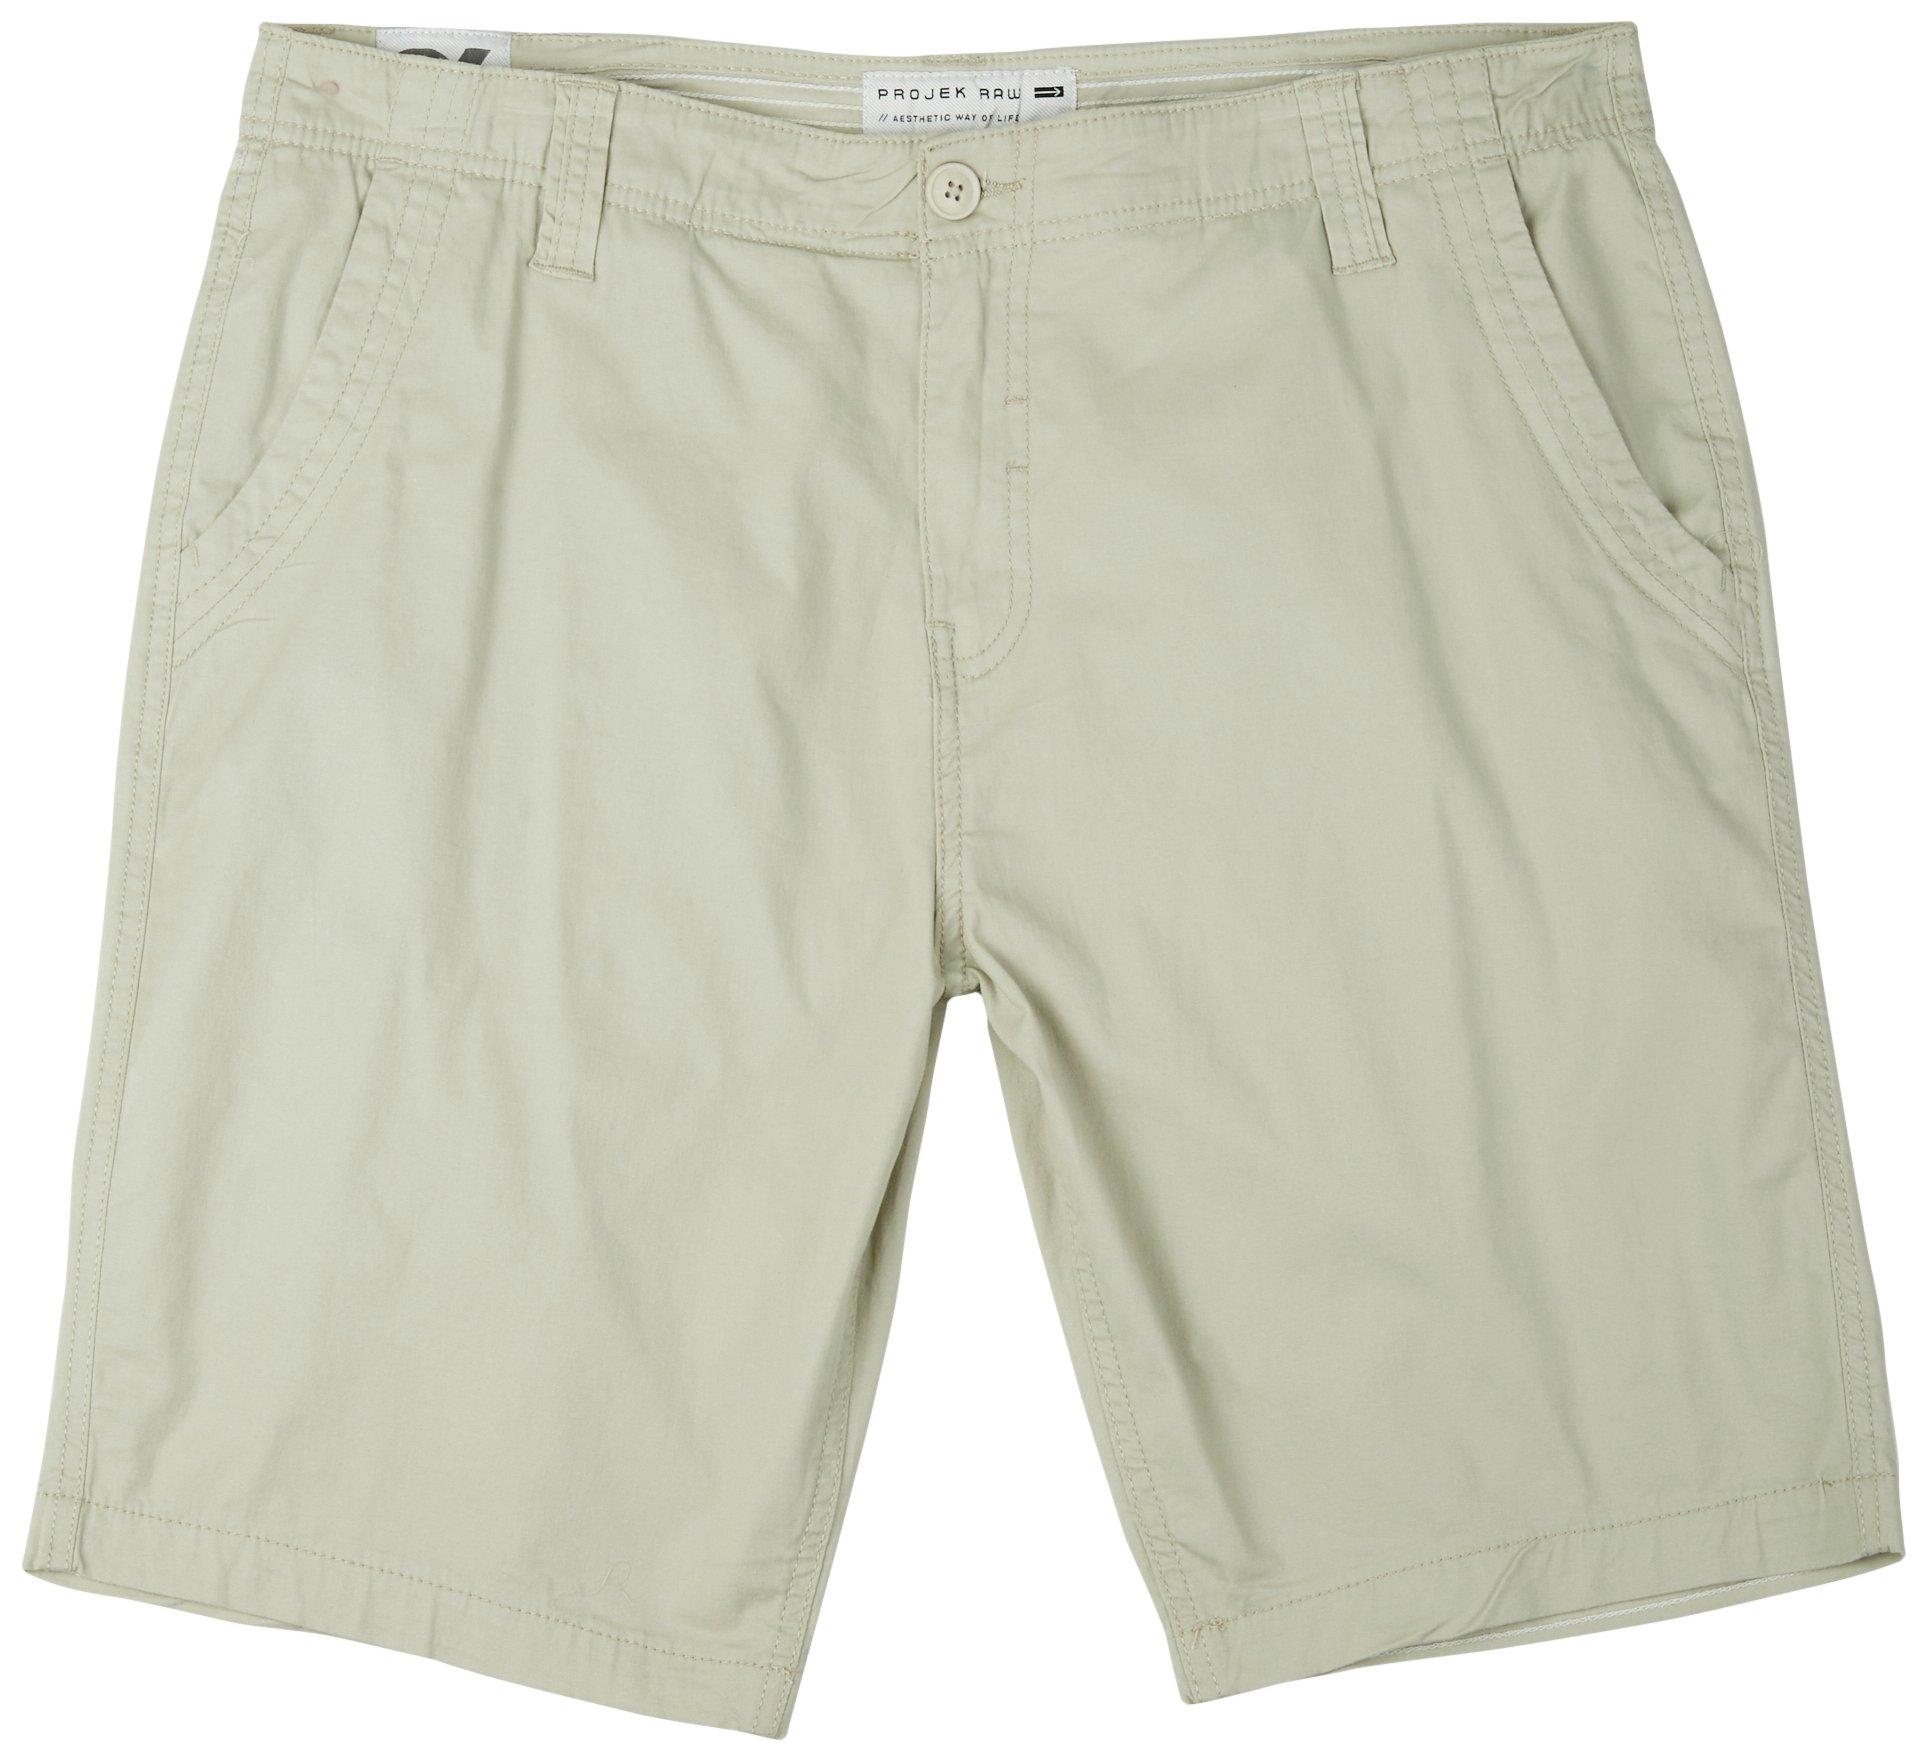 Mens 9 in. Twill Shorts